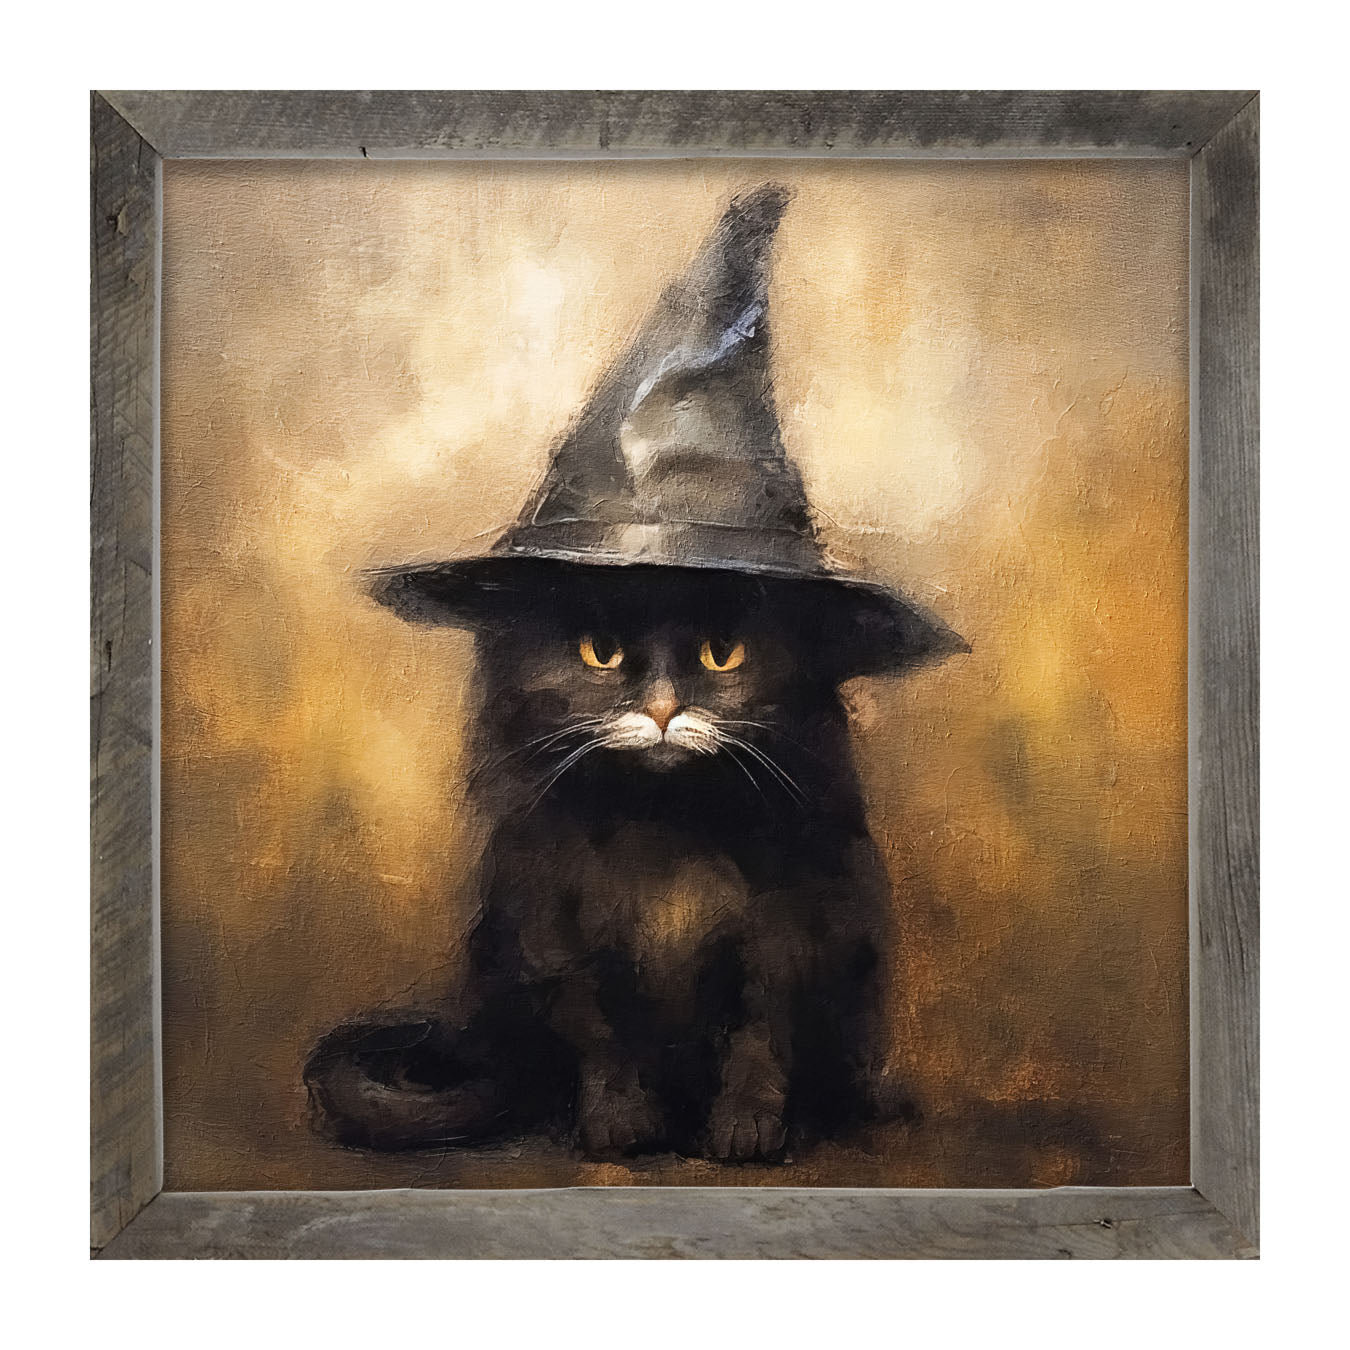 Cat with Witch hat